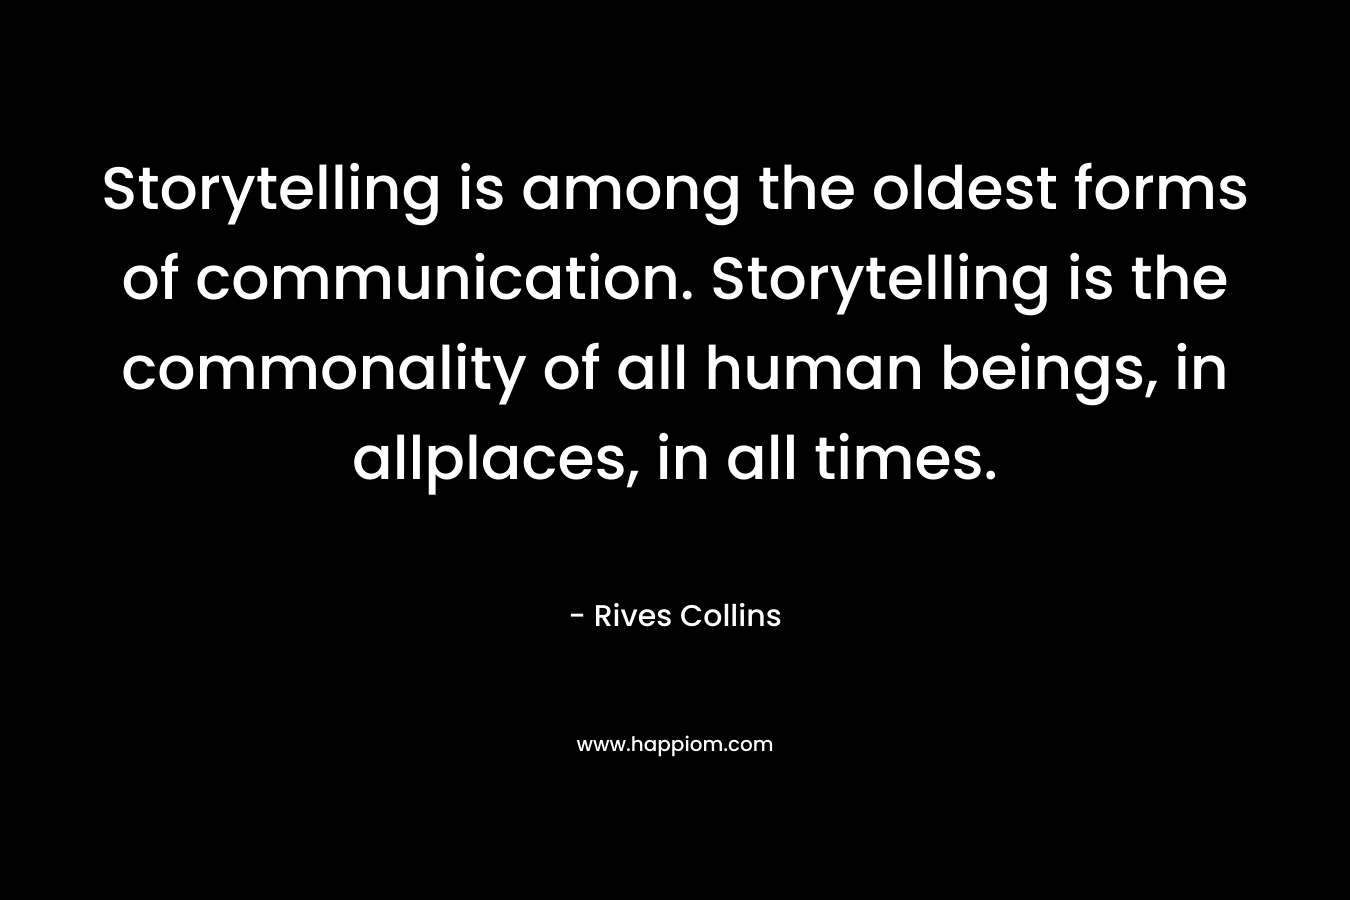 Storytelling is among the oldest forms of communication. Storytelling is the commonality of all human beings, in allplaces, in all times. 